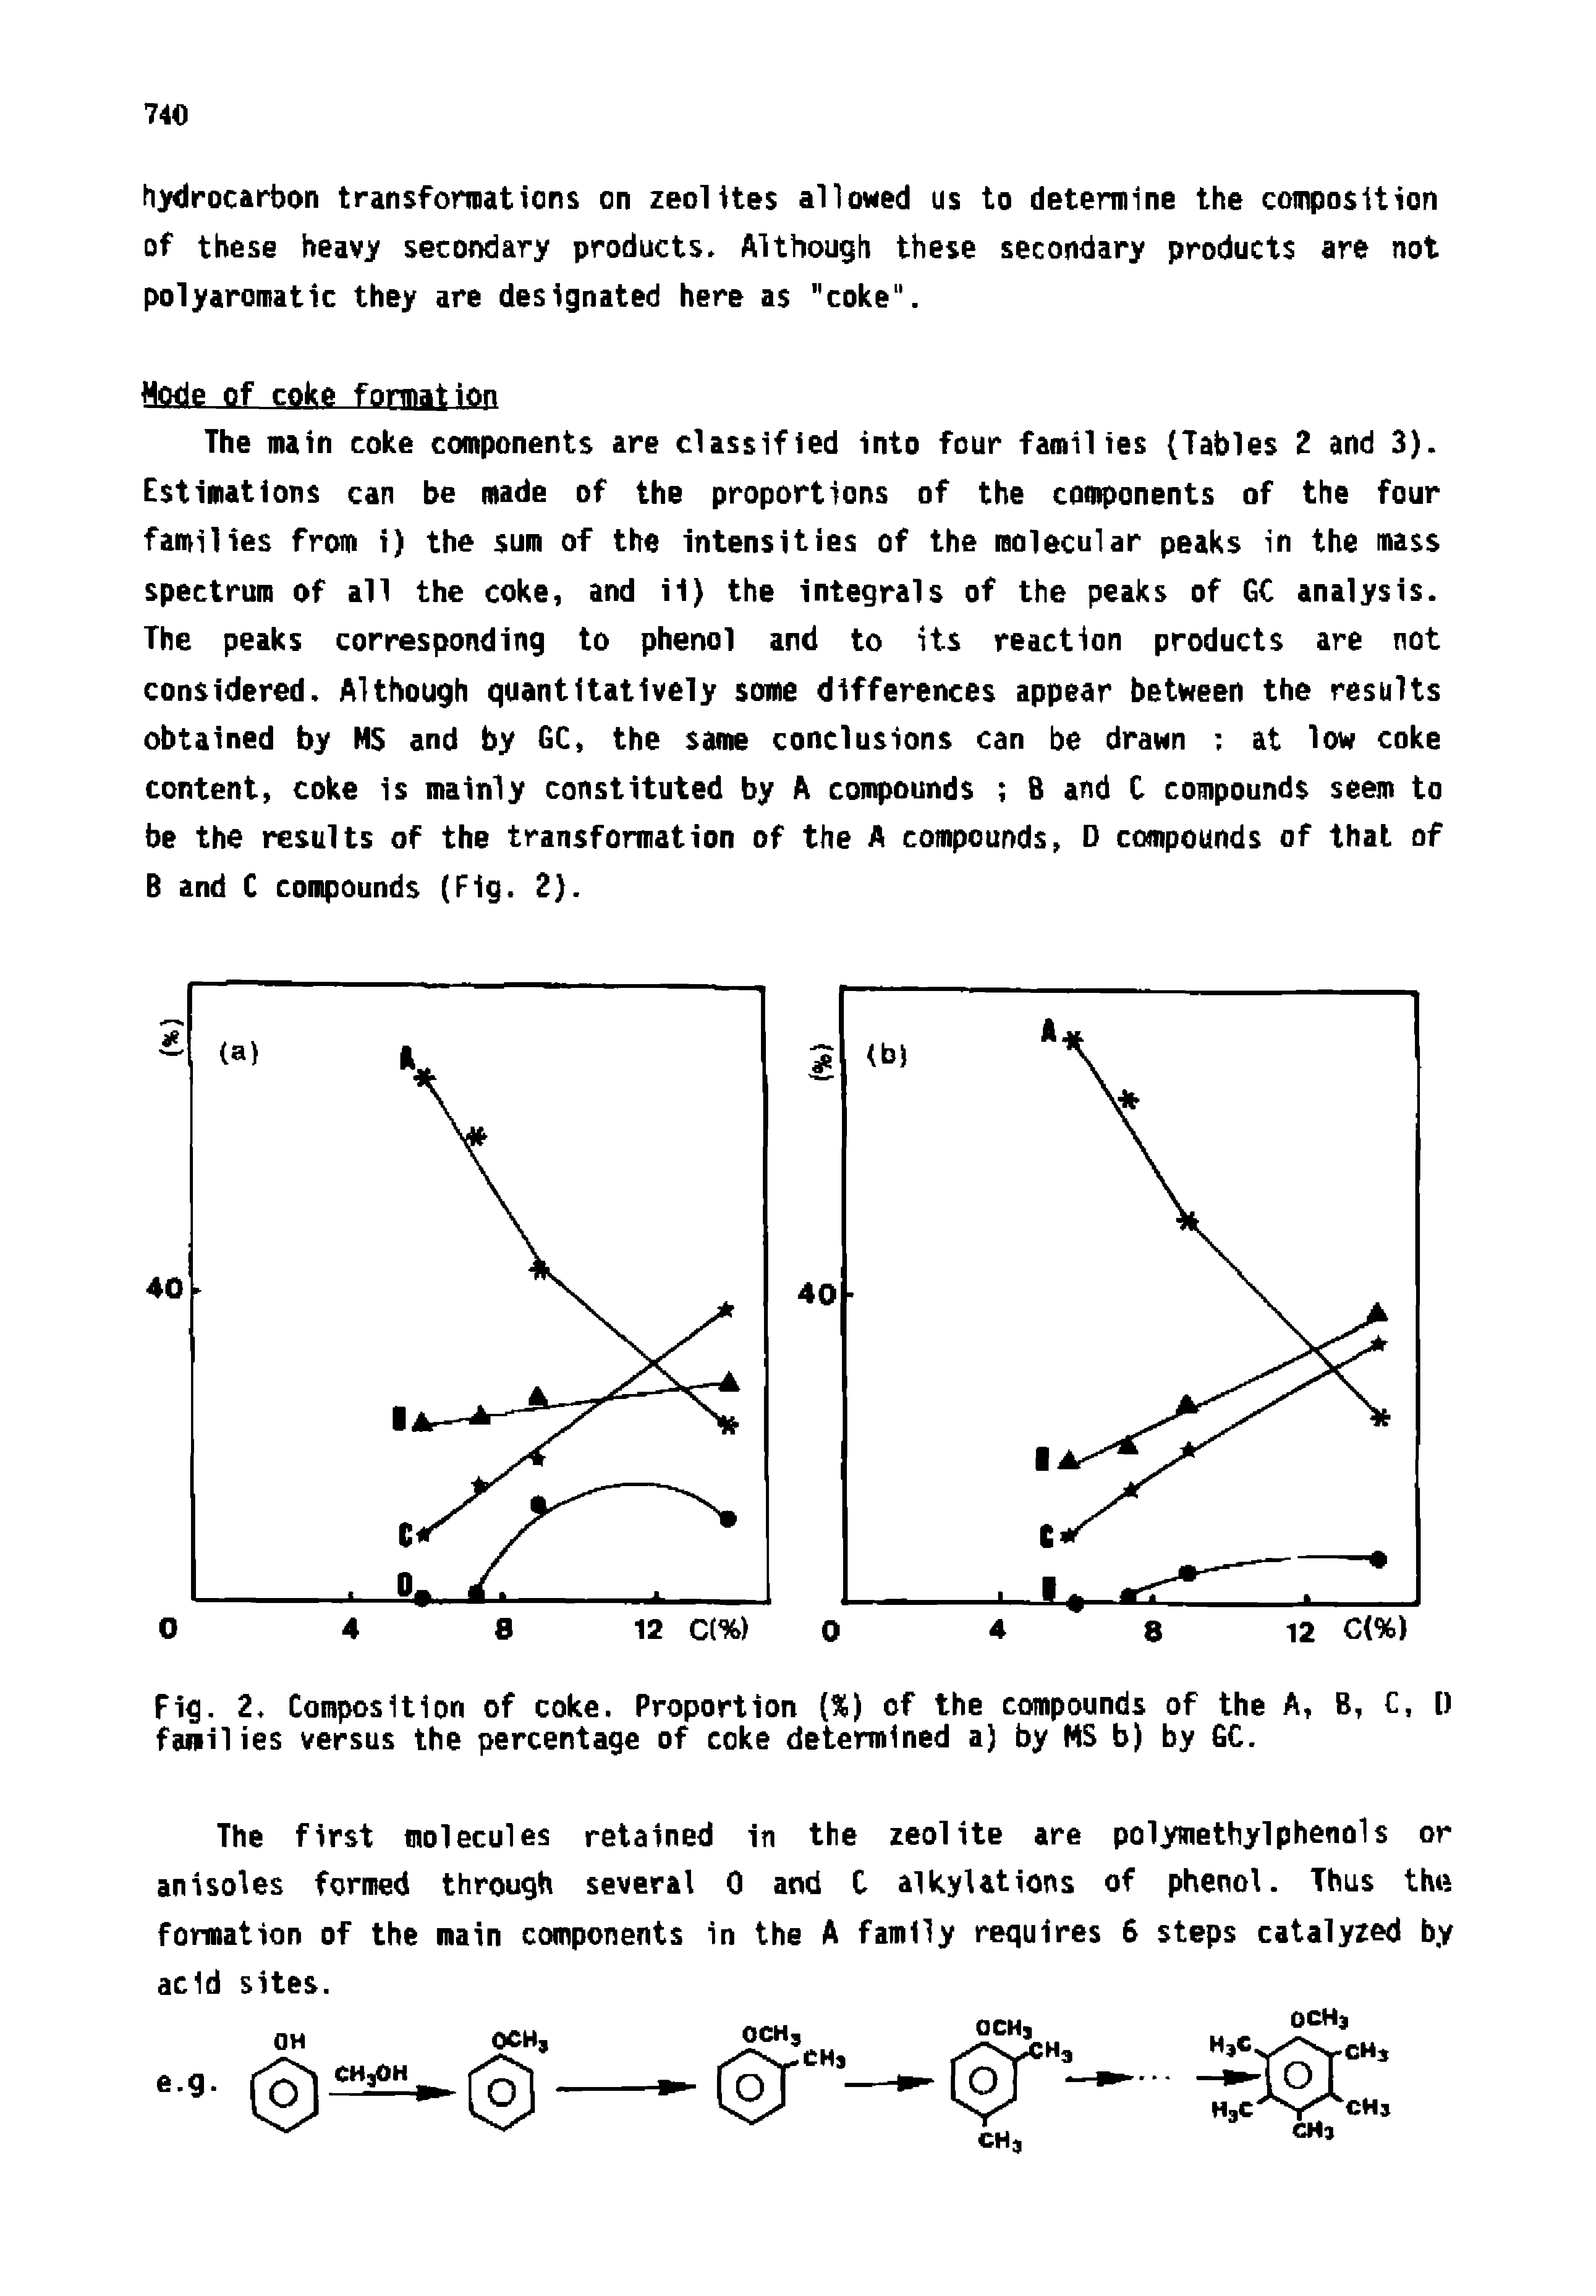 Fig. 2. Composition of coke. Proportion (X) of the compounds of the A, B, C, [) families versus the percentage of coke determined a by MS b) by GC.